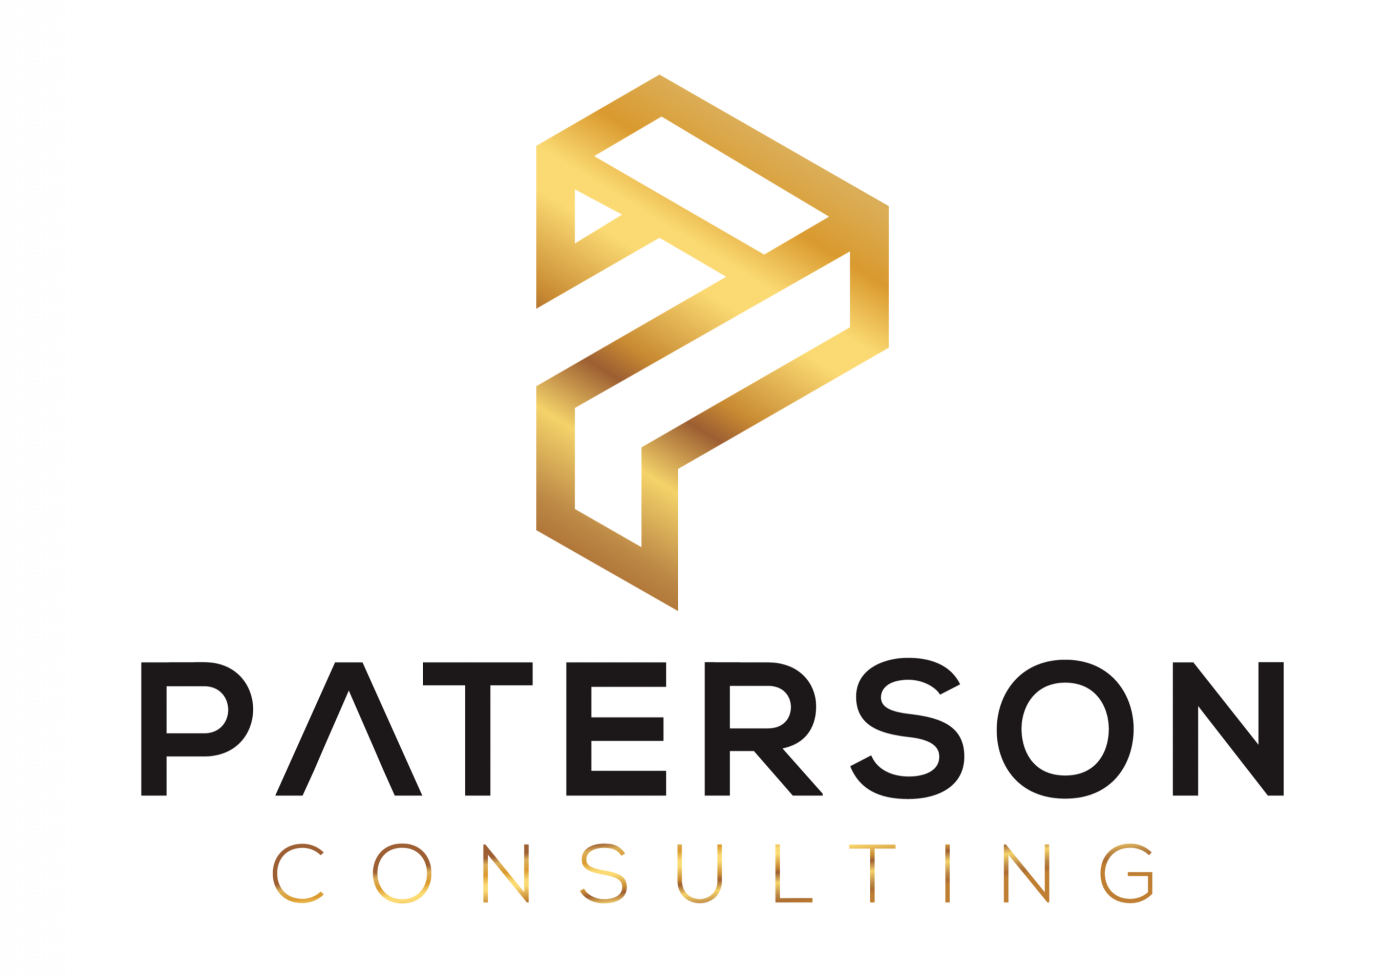 Paterson_Consulting-01